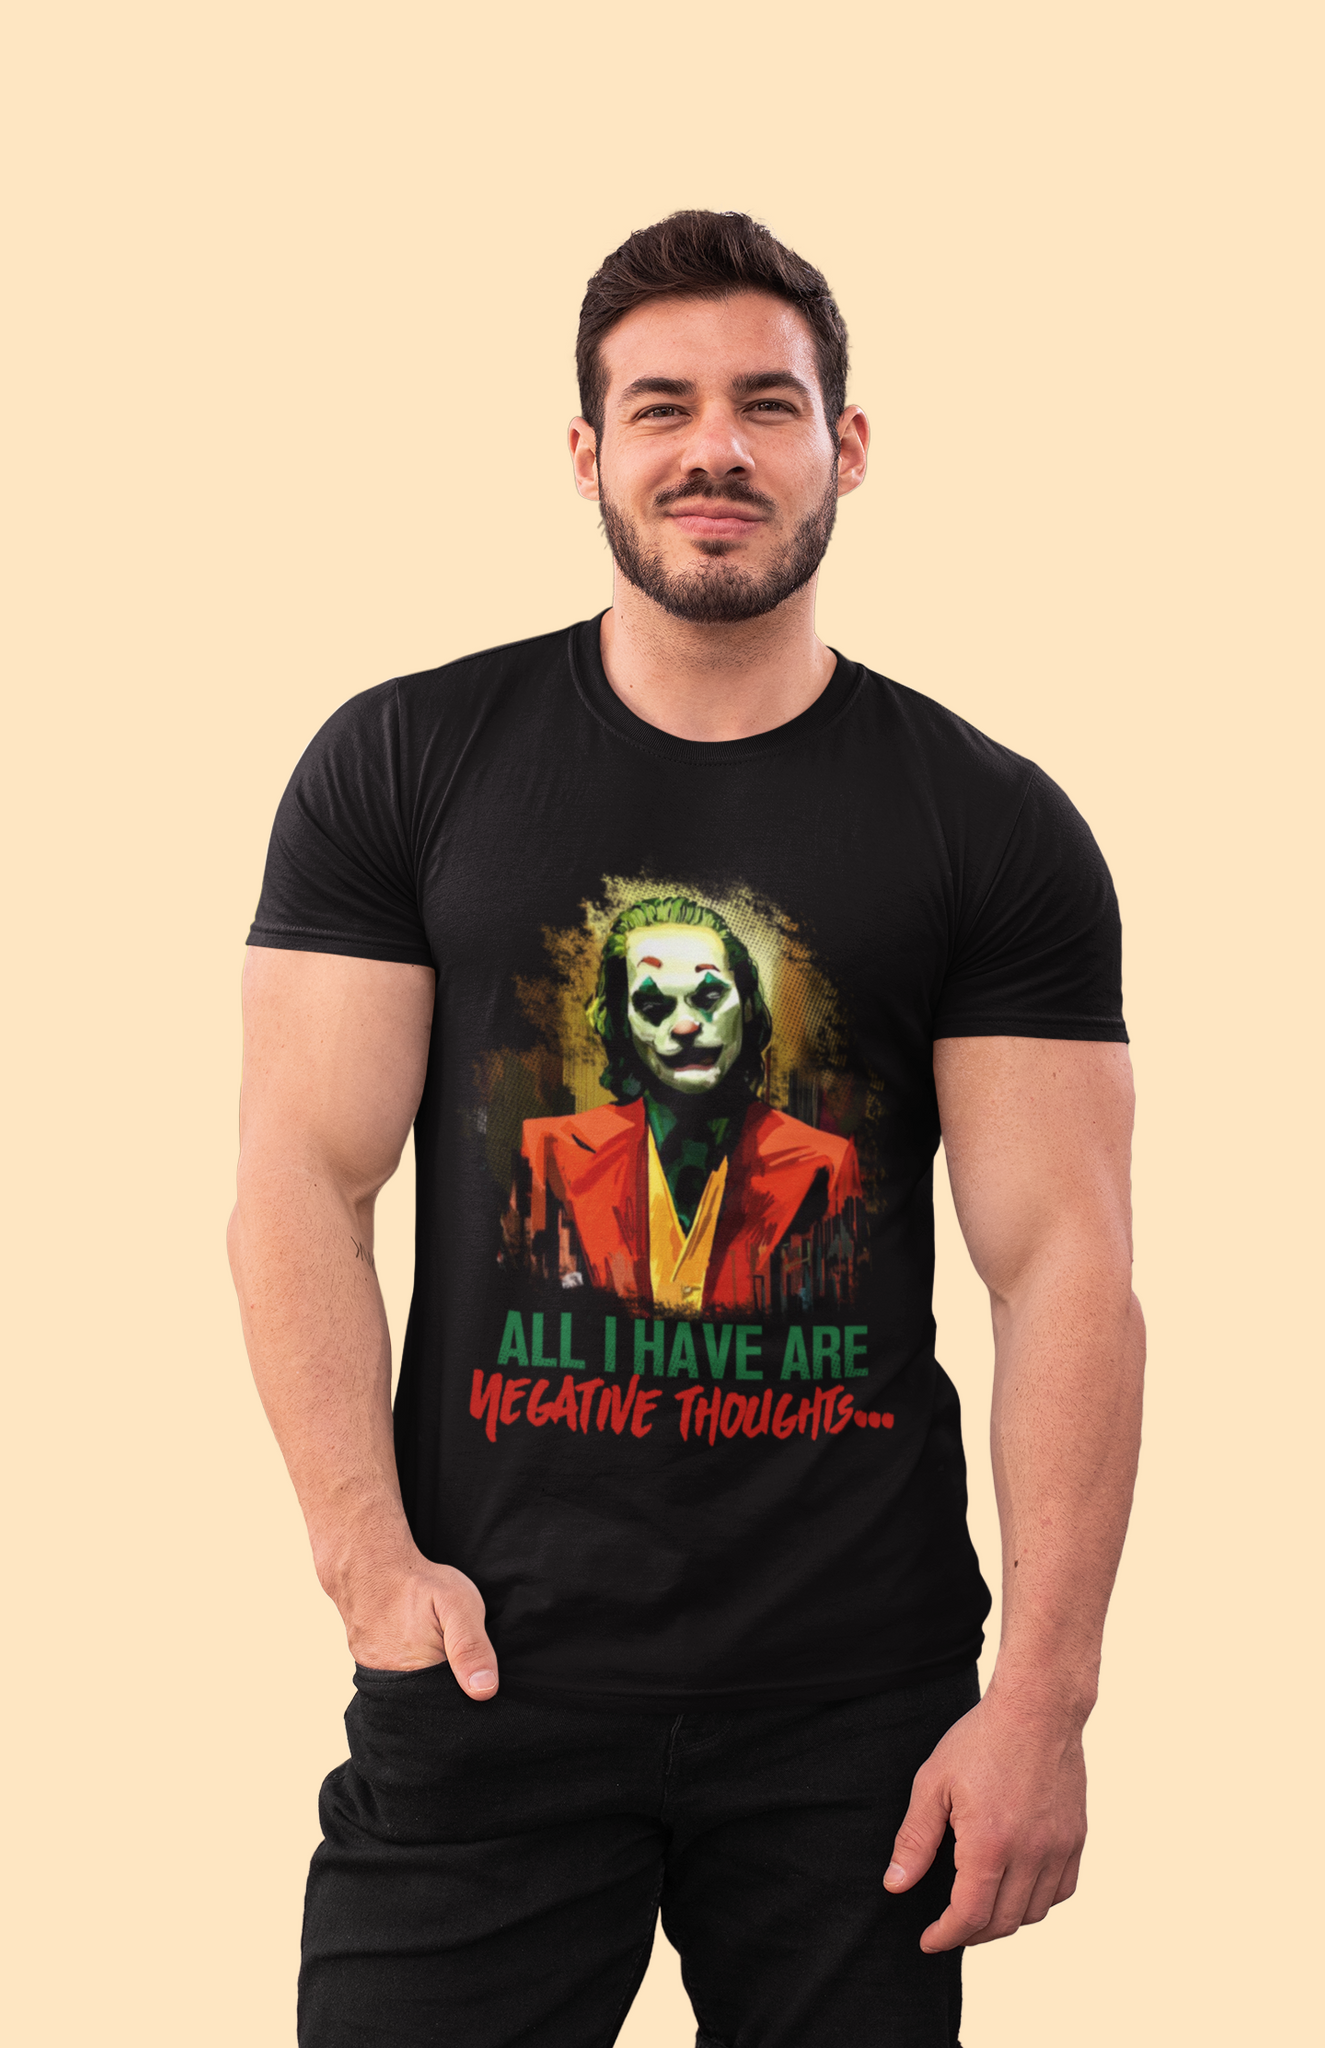 Joker T Shirt, Joker The Comedian Tshirt, All I Have Are Negative Thoughts Shirt, Halloween Gifts